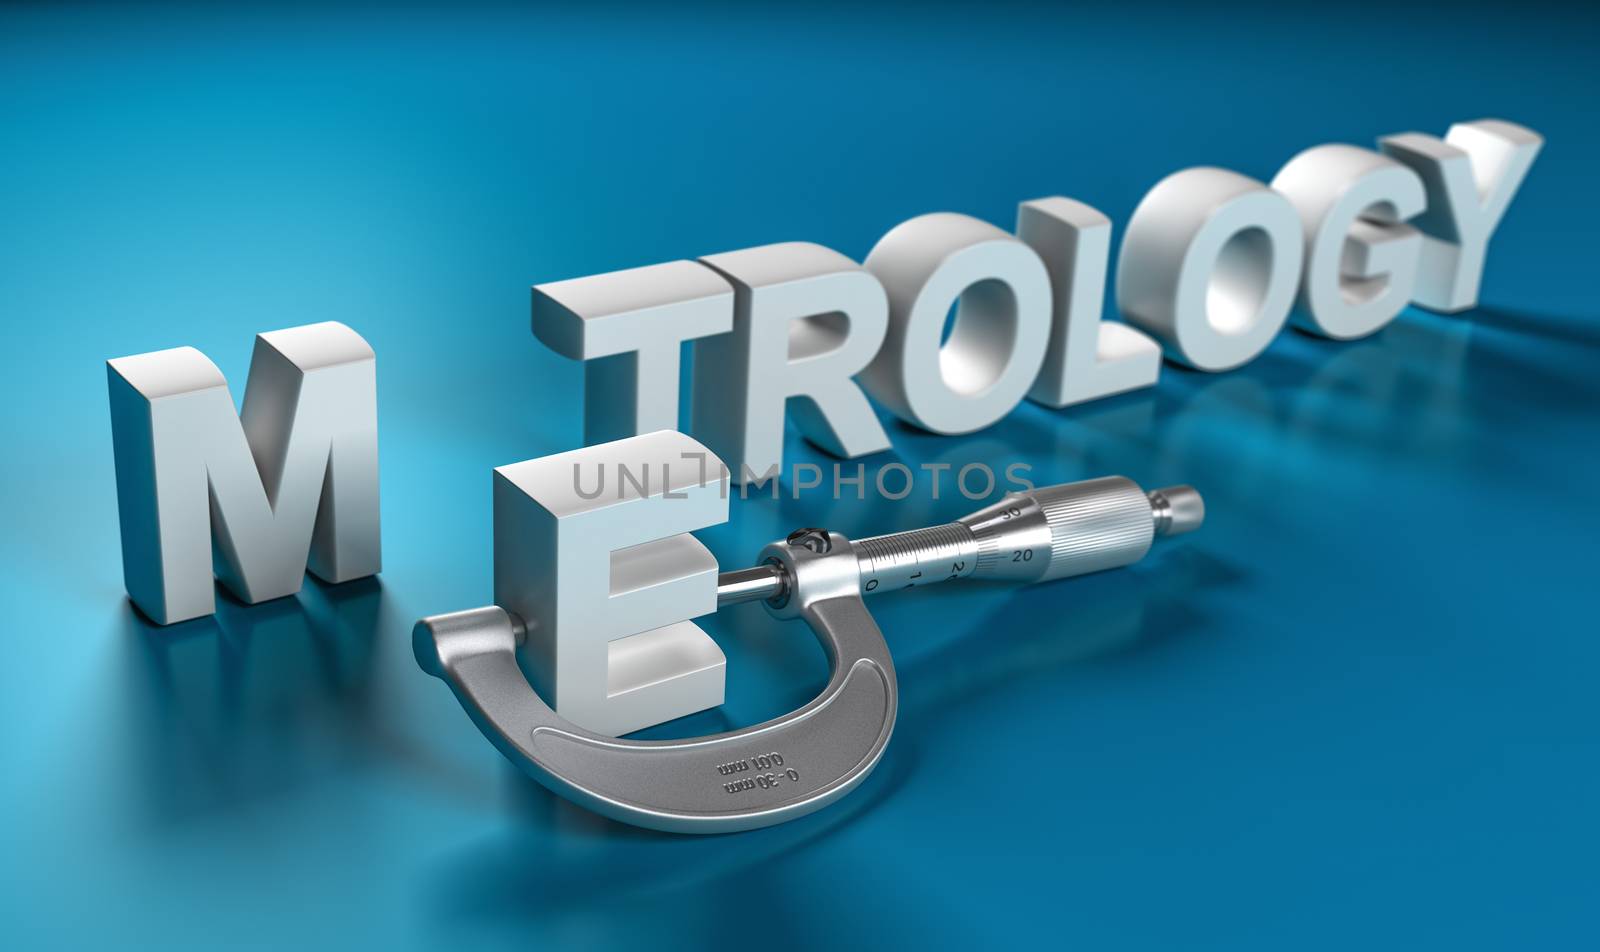 Word metrology written in 3d with a micrometer over a blue background. Metrological instruments concept. 3D illustration